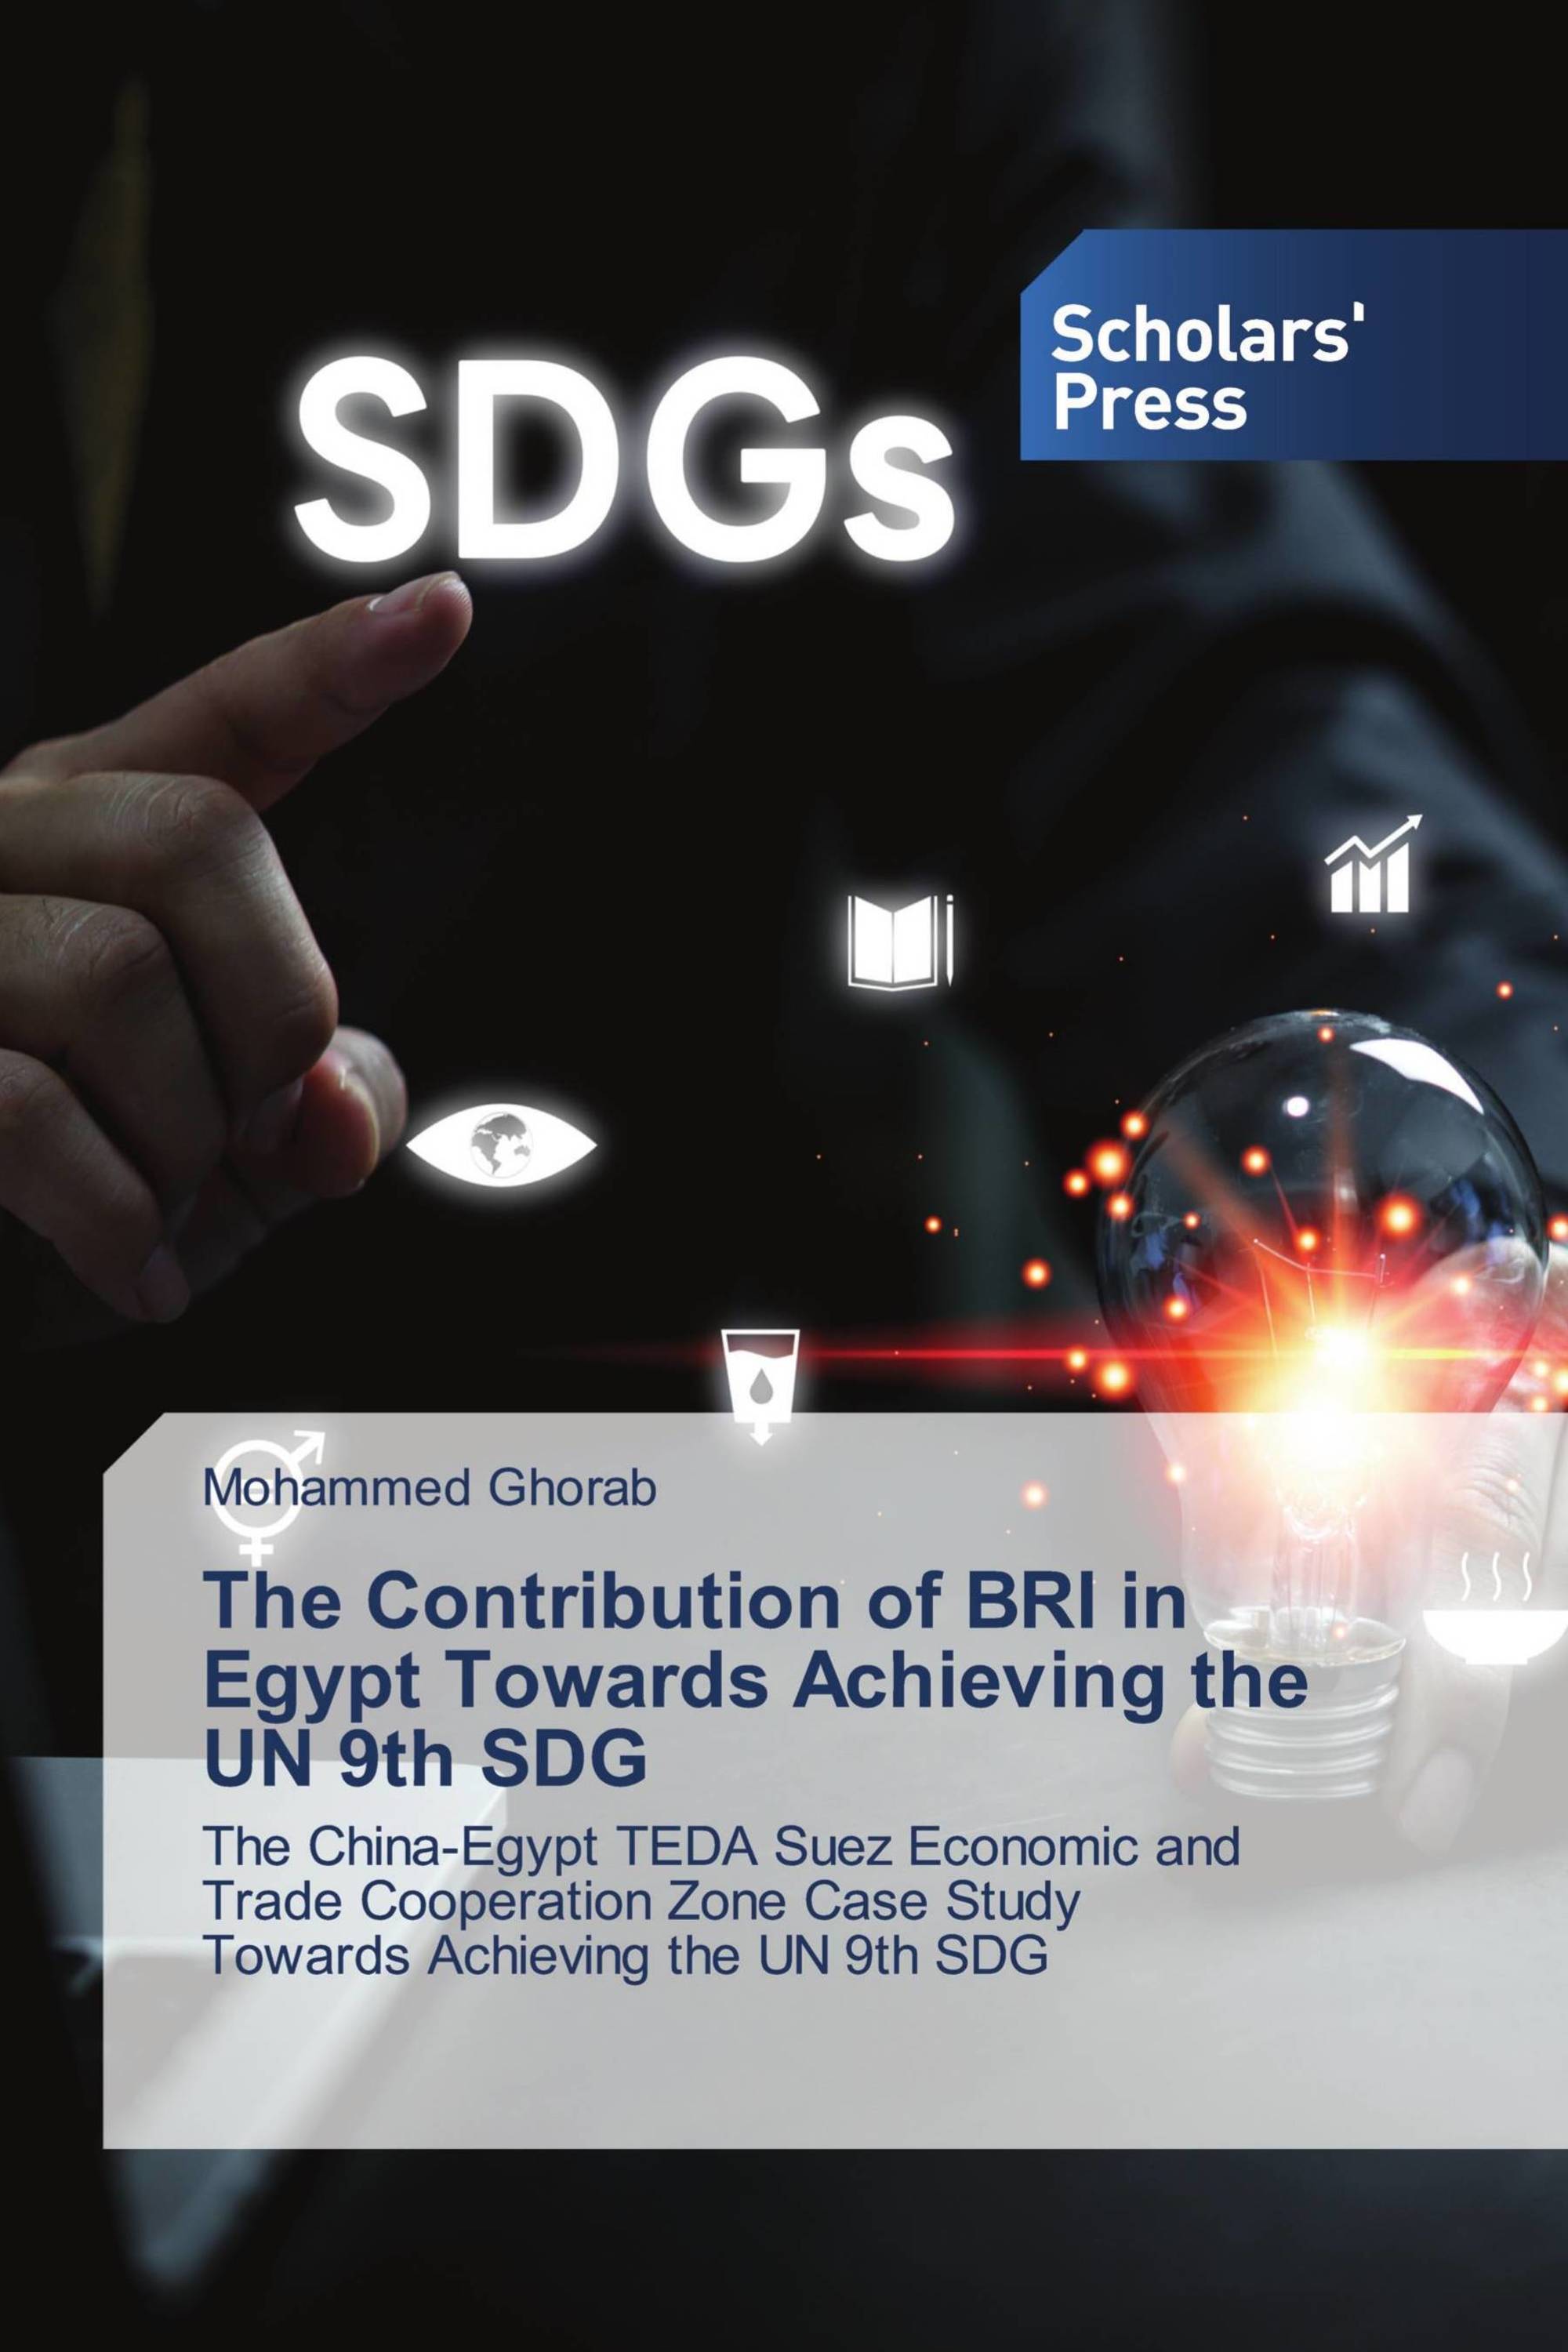 The Contribution of BRI in Egypt Towards Achieving the UN 9th SDG